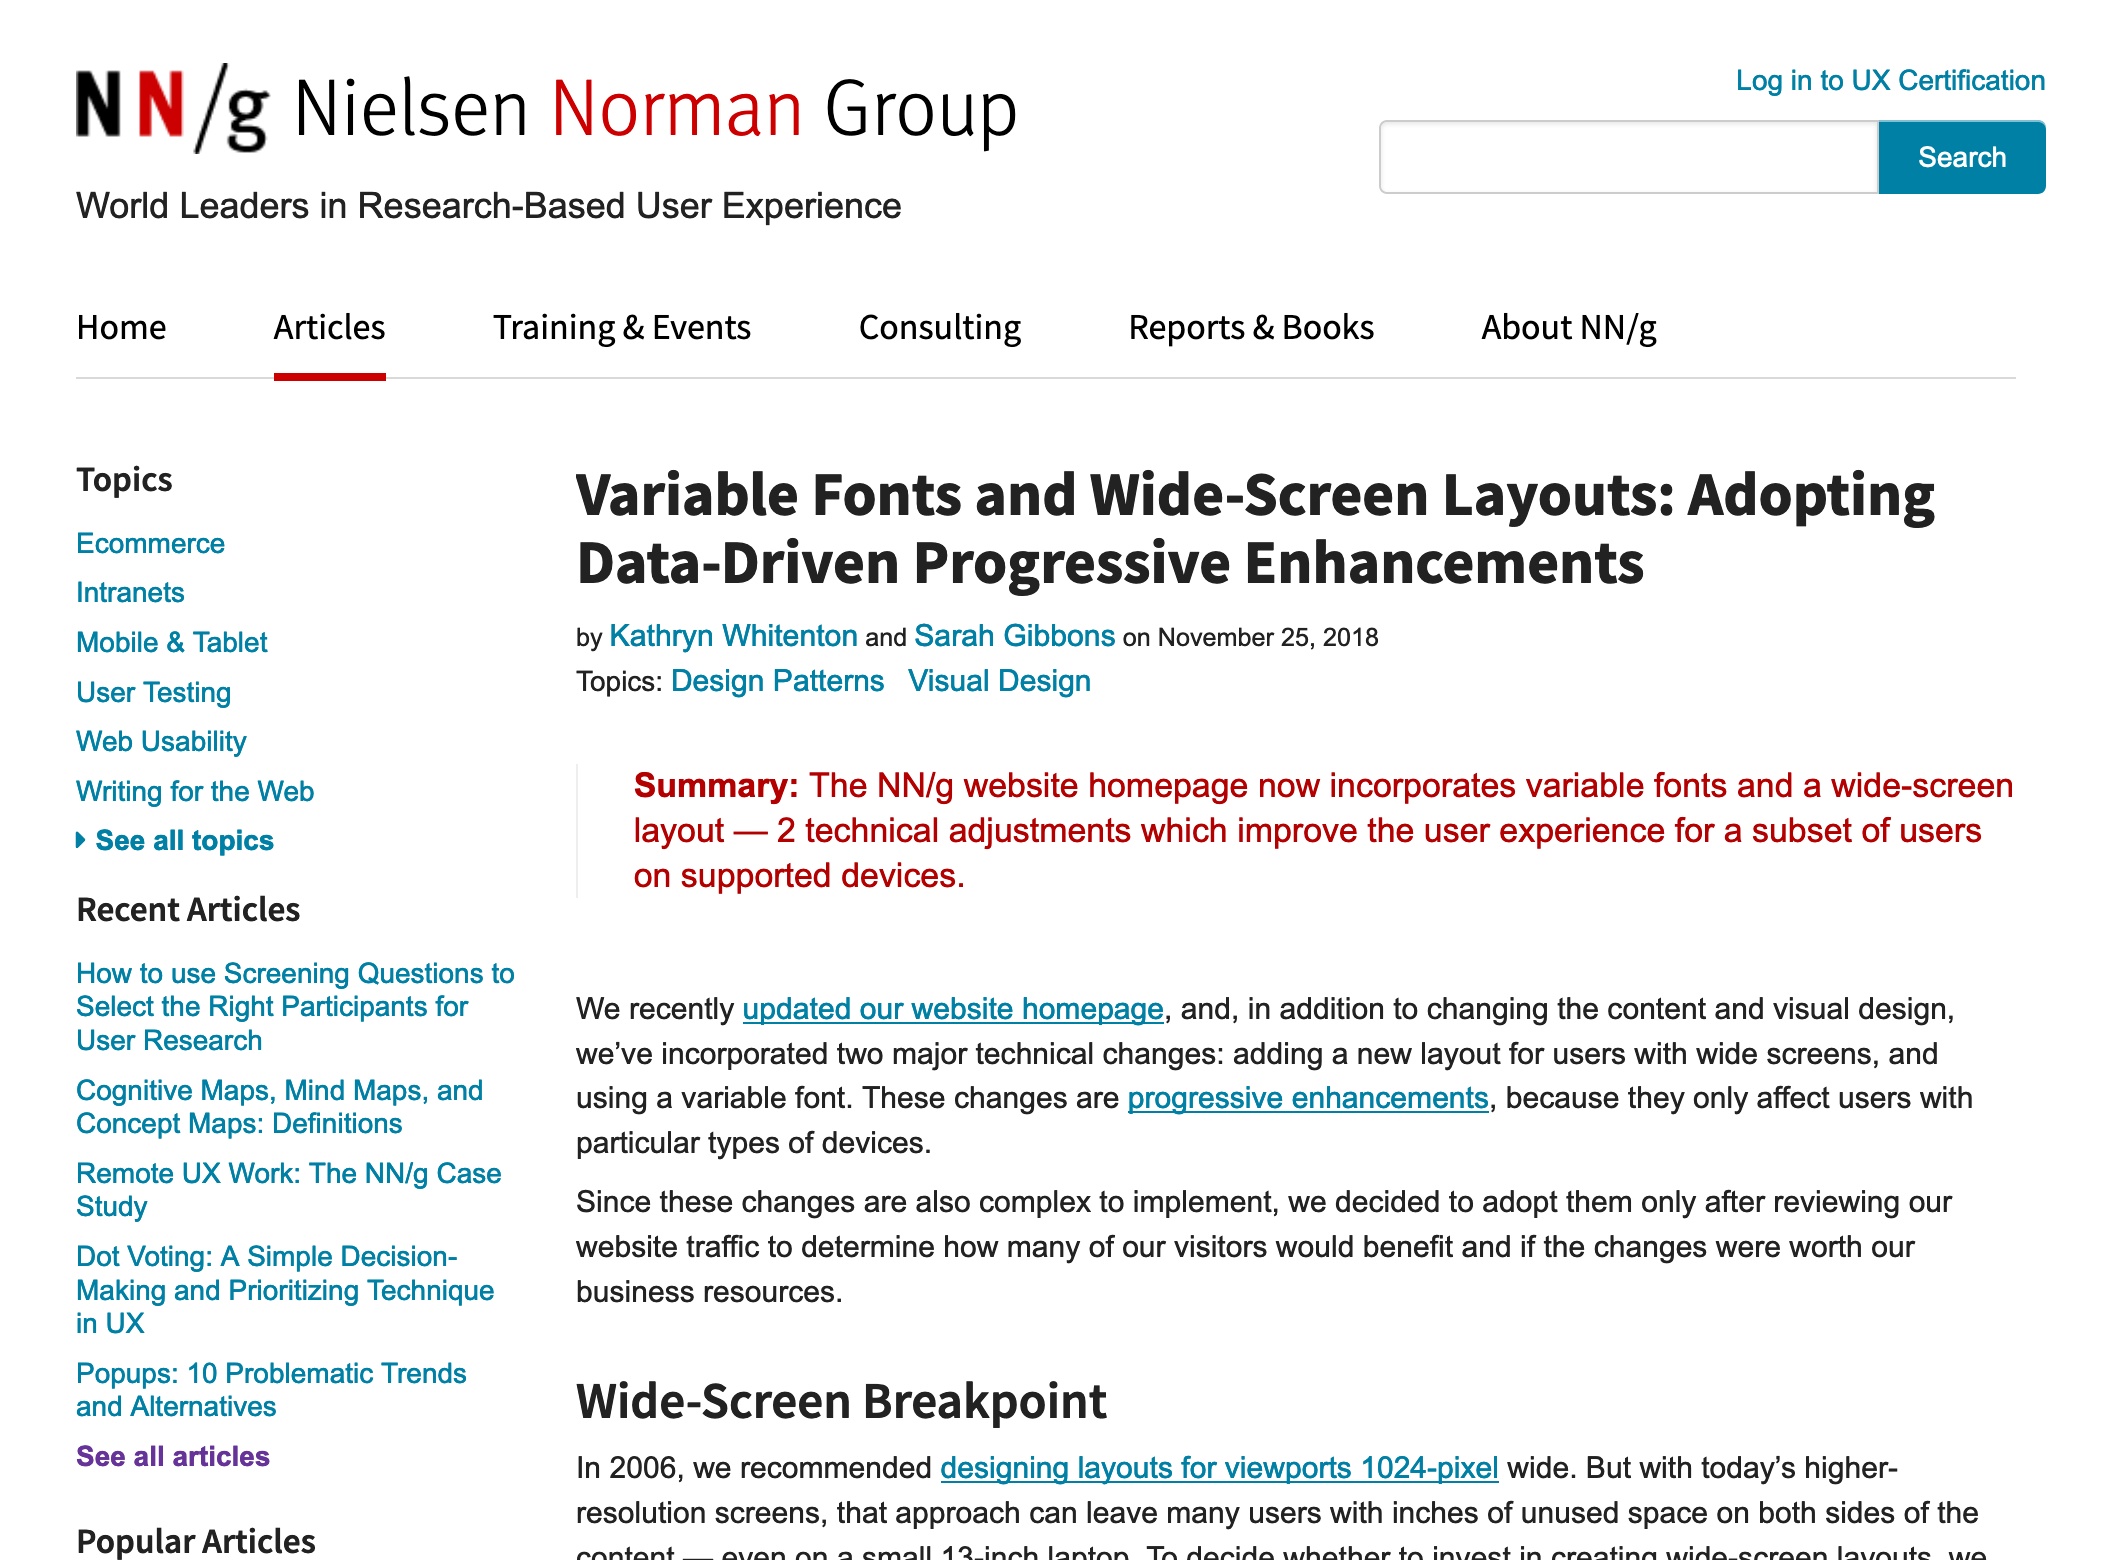 Nielsen Norman Group’s variable font research